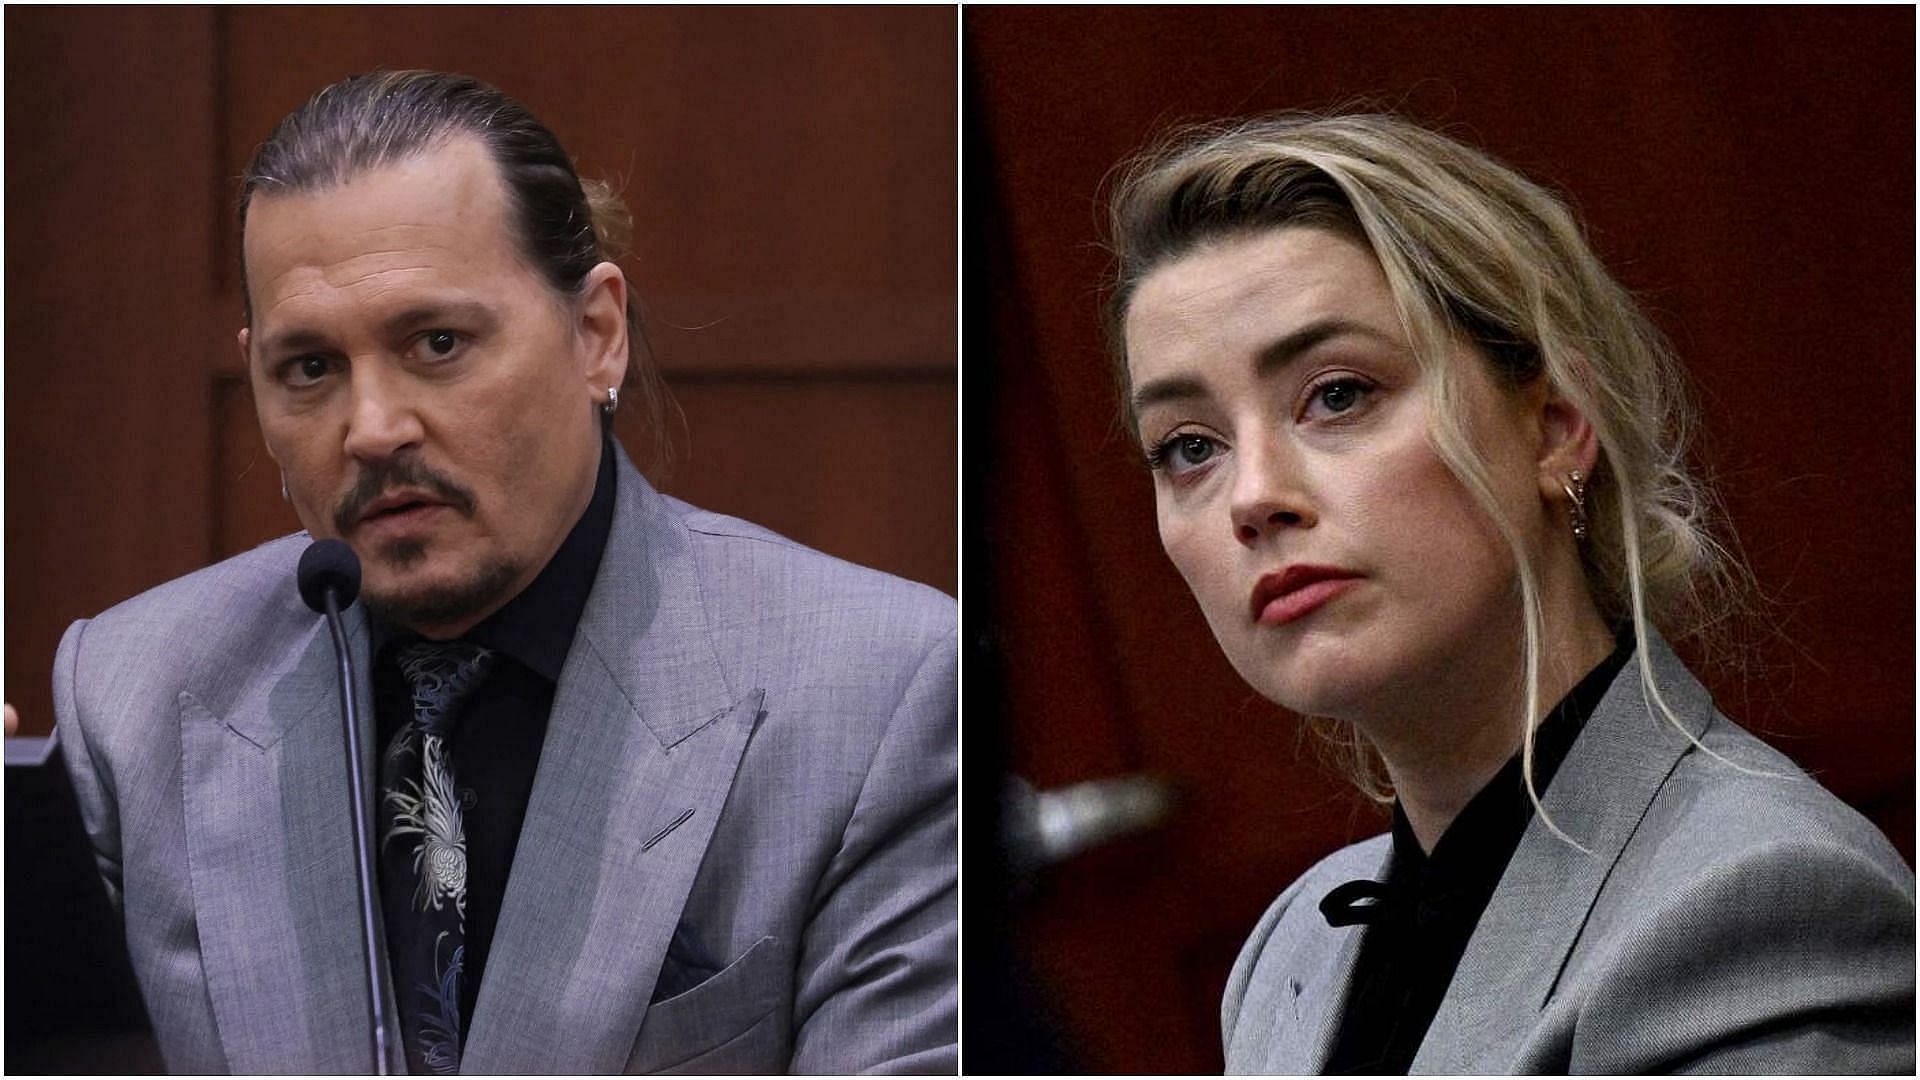 Johnny Depp and Amber Heard in court (Image via Evelyn Hocksteinp/Pool/AFP/Getty Images and Brendan Smialowski/POOL/AFP/Getty Images)